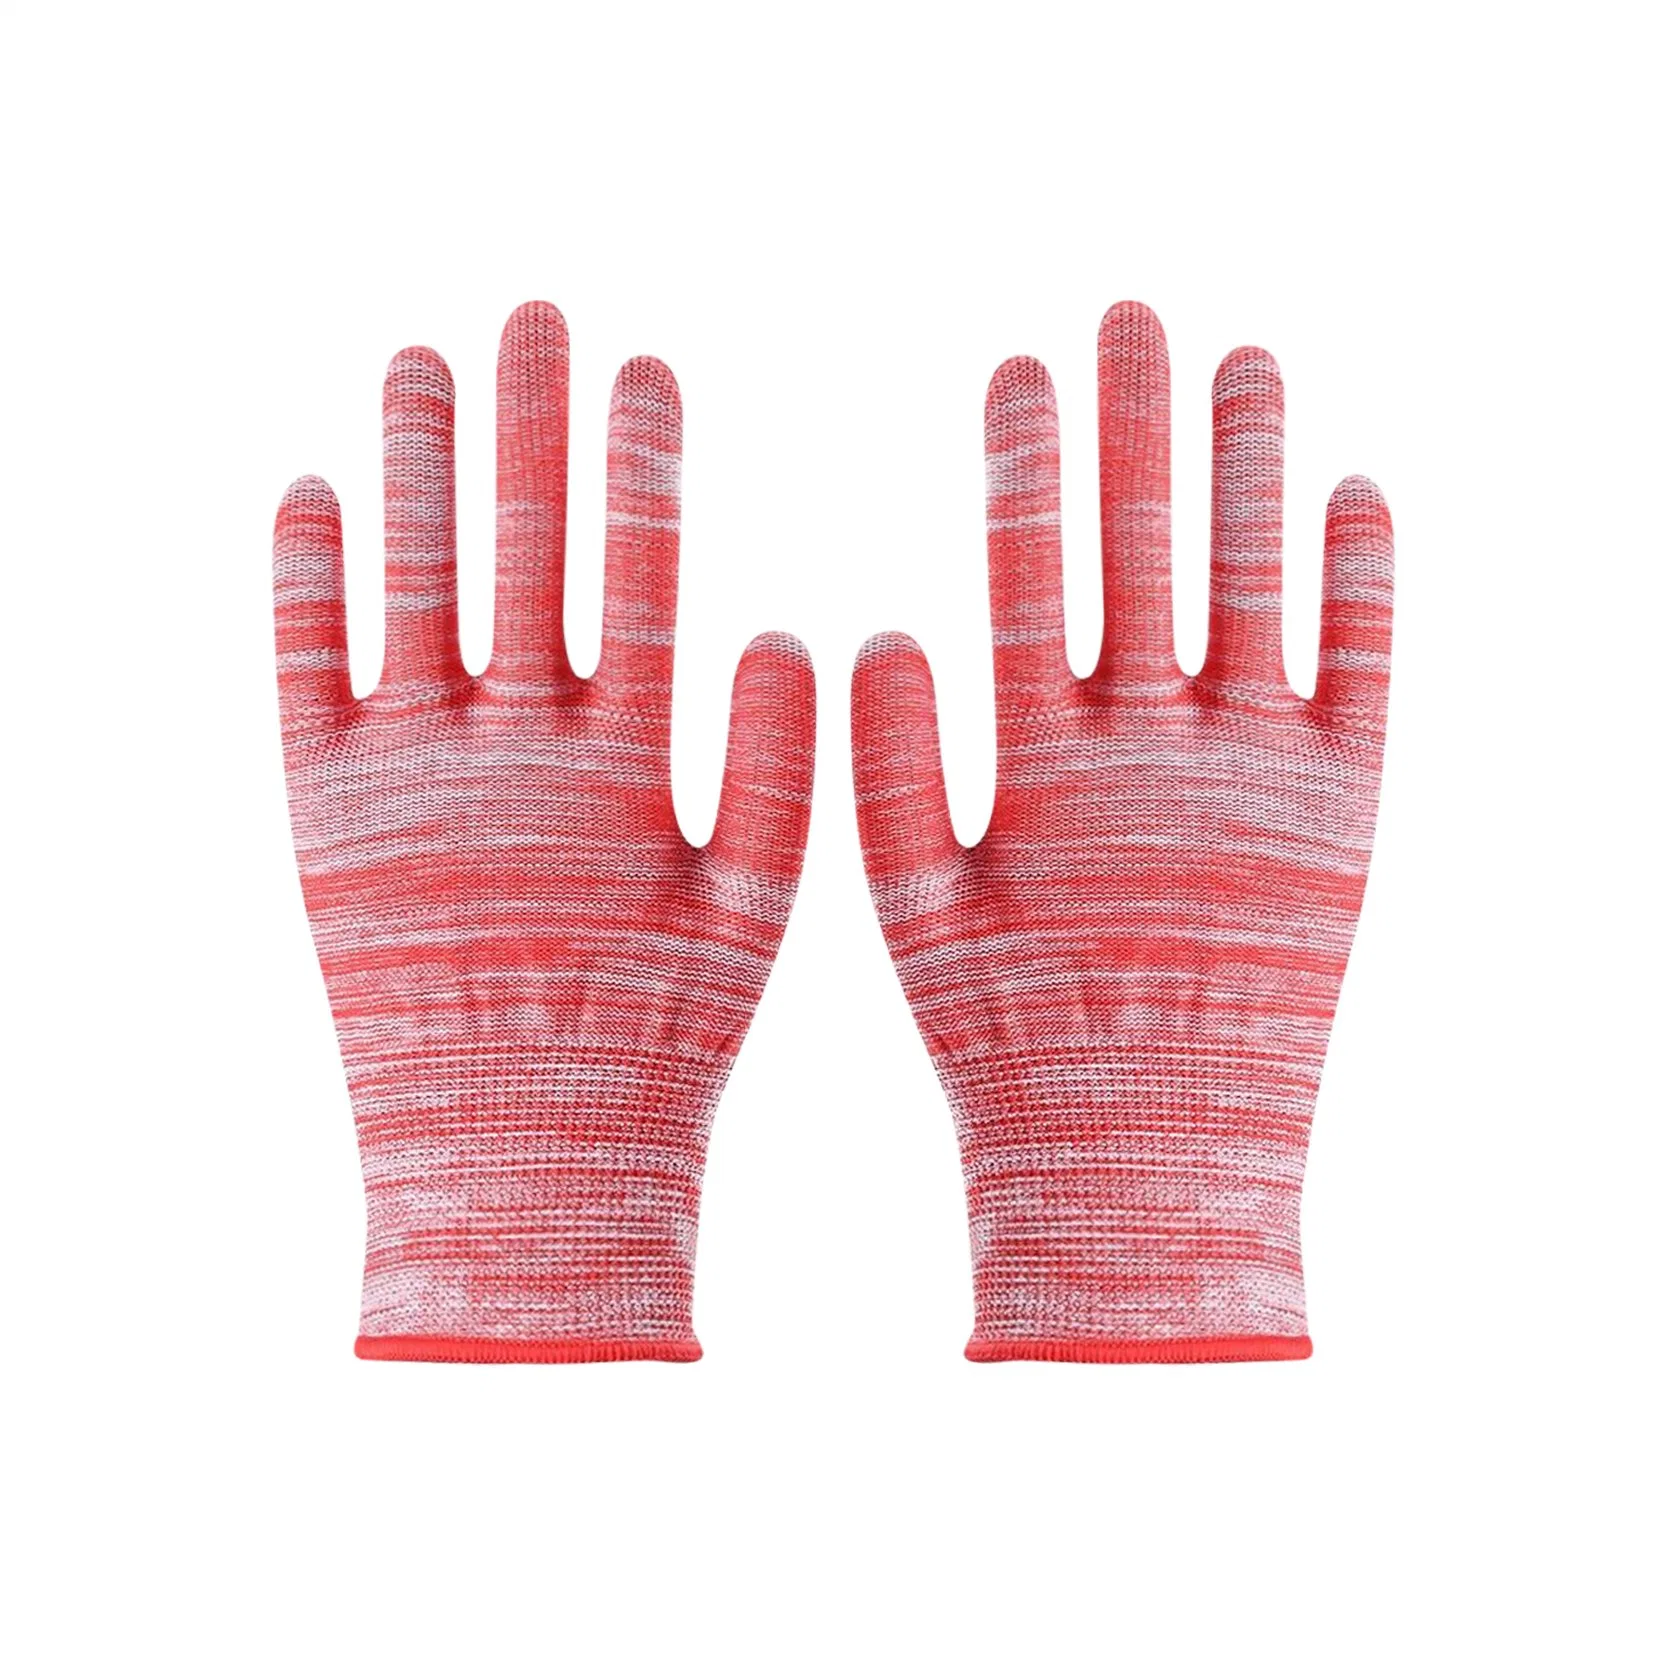 Cotton Knitted Hand Gloves for General Use Safety Work